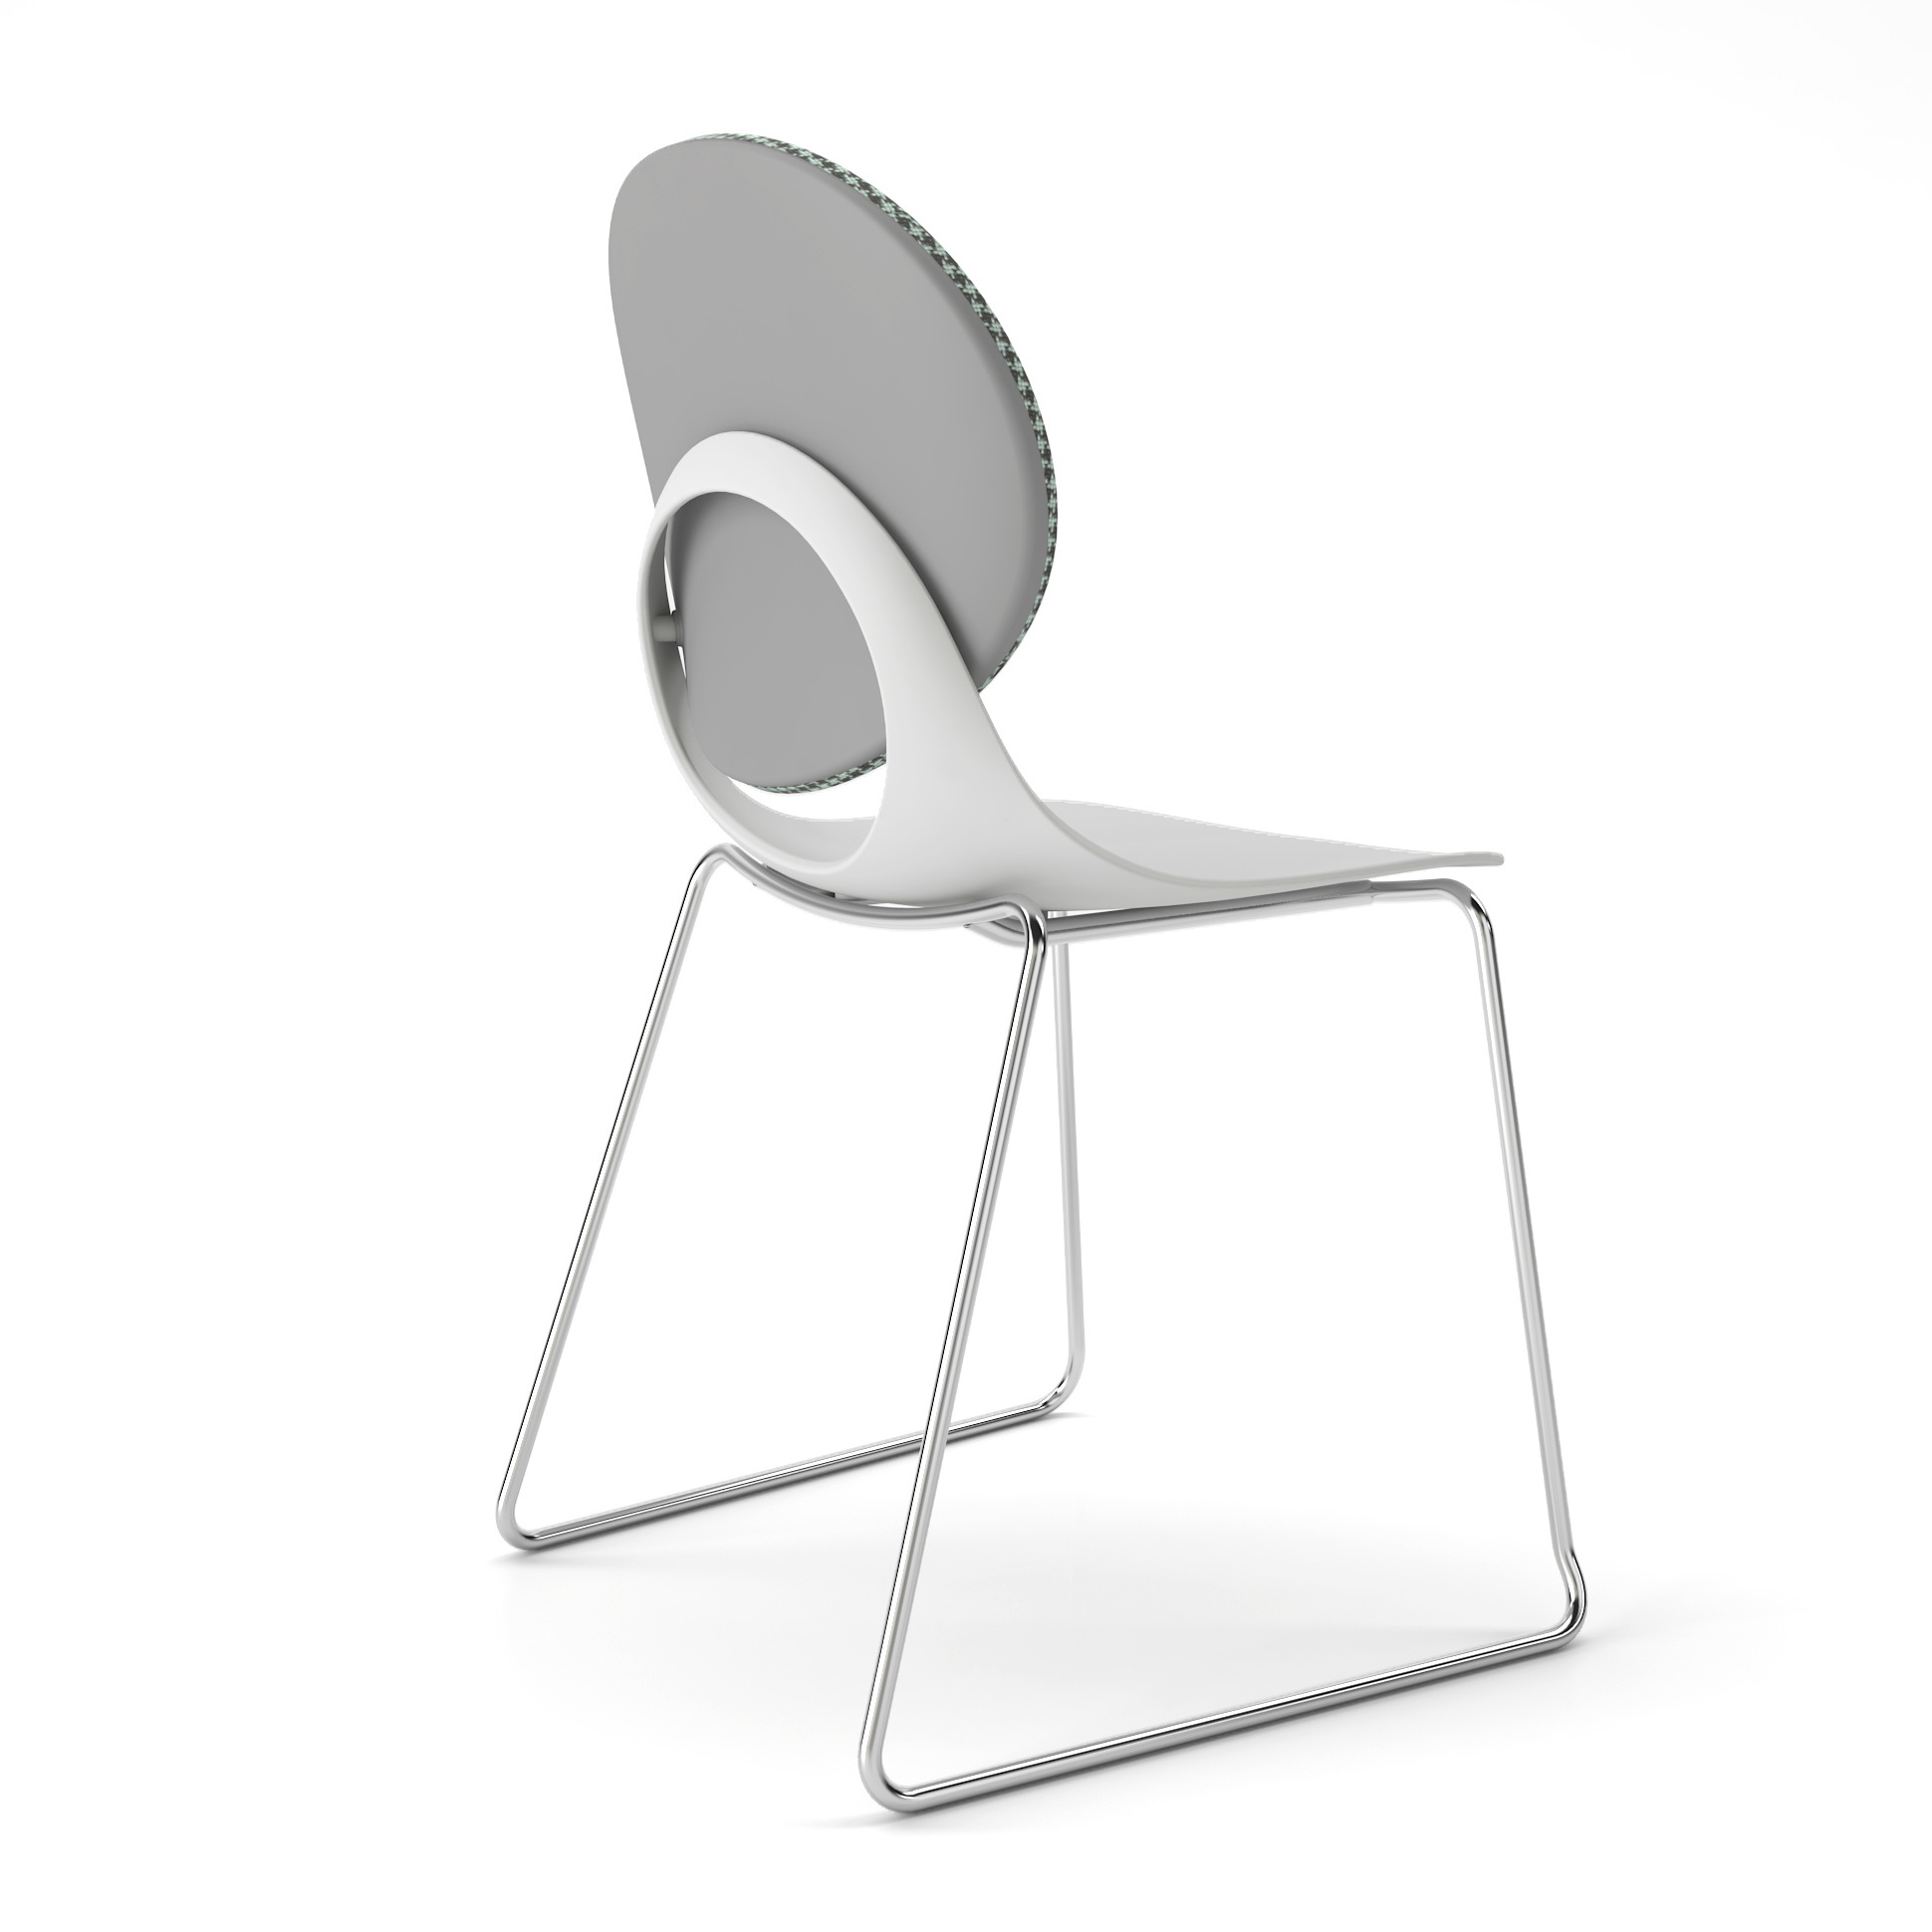 New Design Leisure Chair Yuer